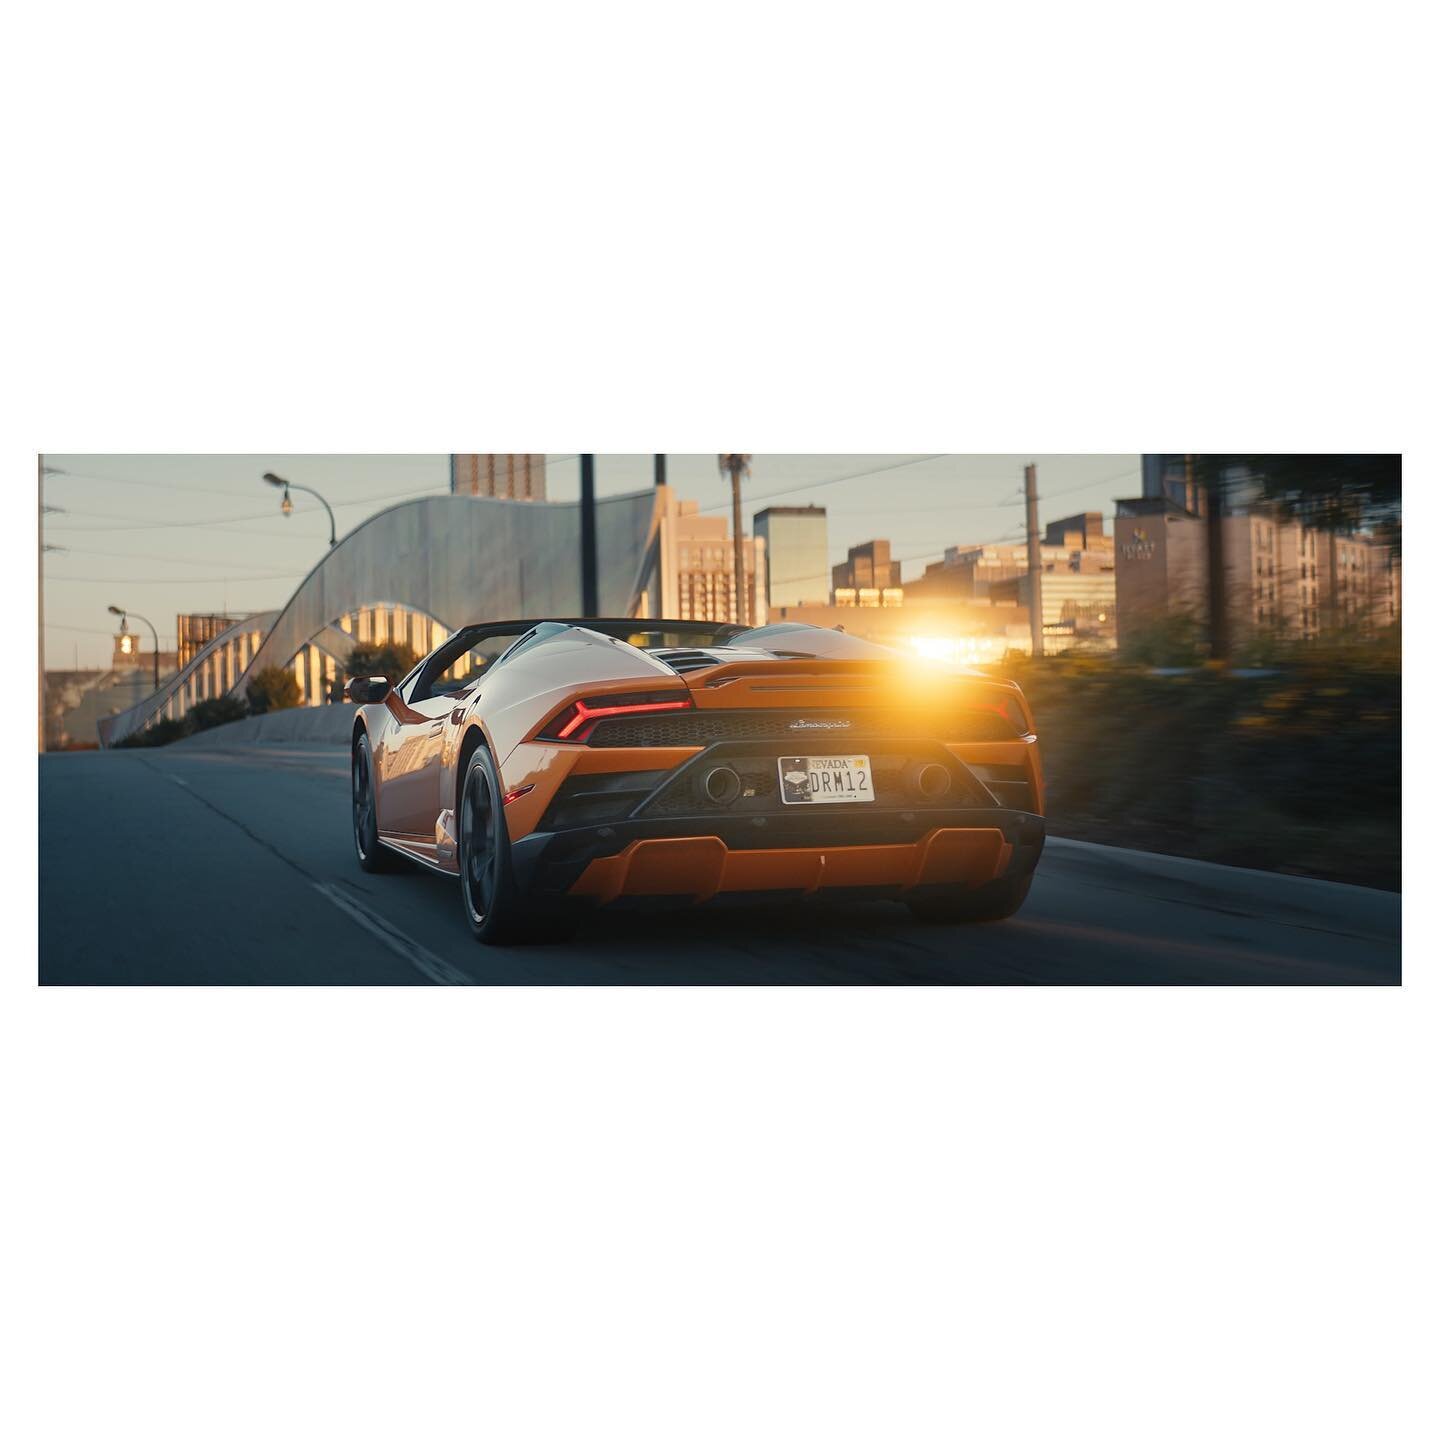 Shot this last year with @devonryanfilm. I always love a fun car day with friends. 
Thanks everyone who helped out on this one! 

Idk a good way to post anamorphic video yet, sooo link in bio for now 

Director - @devonryanfilm 
DP - 🎥🚕
1st AD - @s